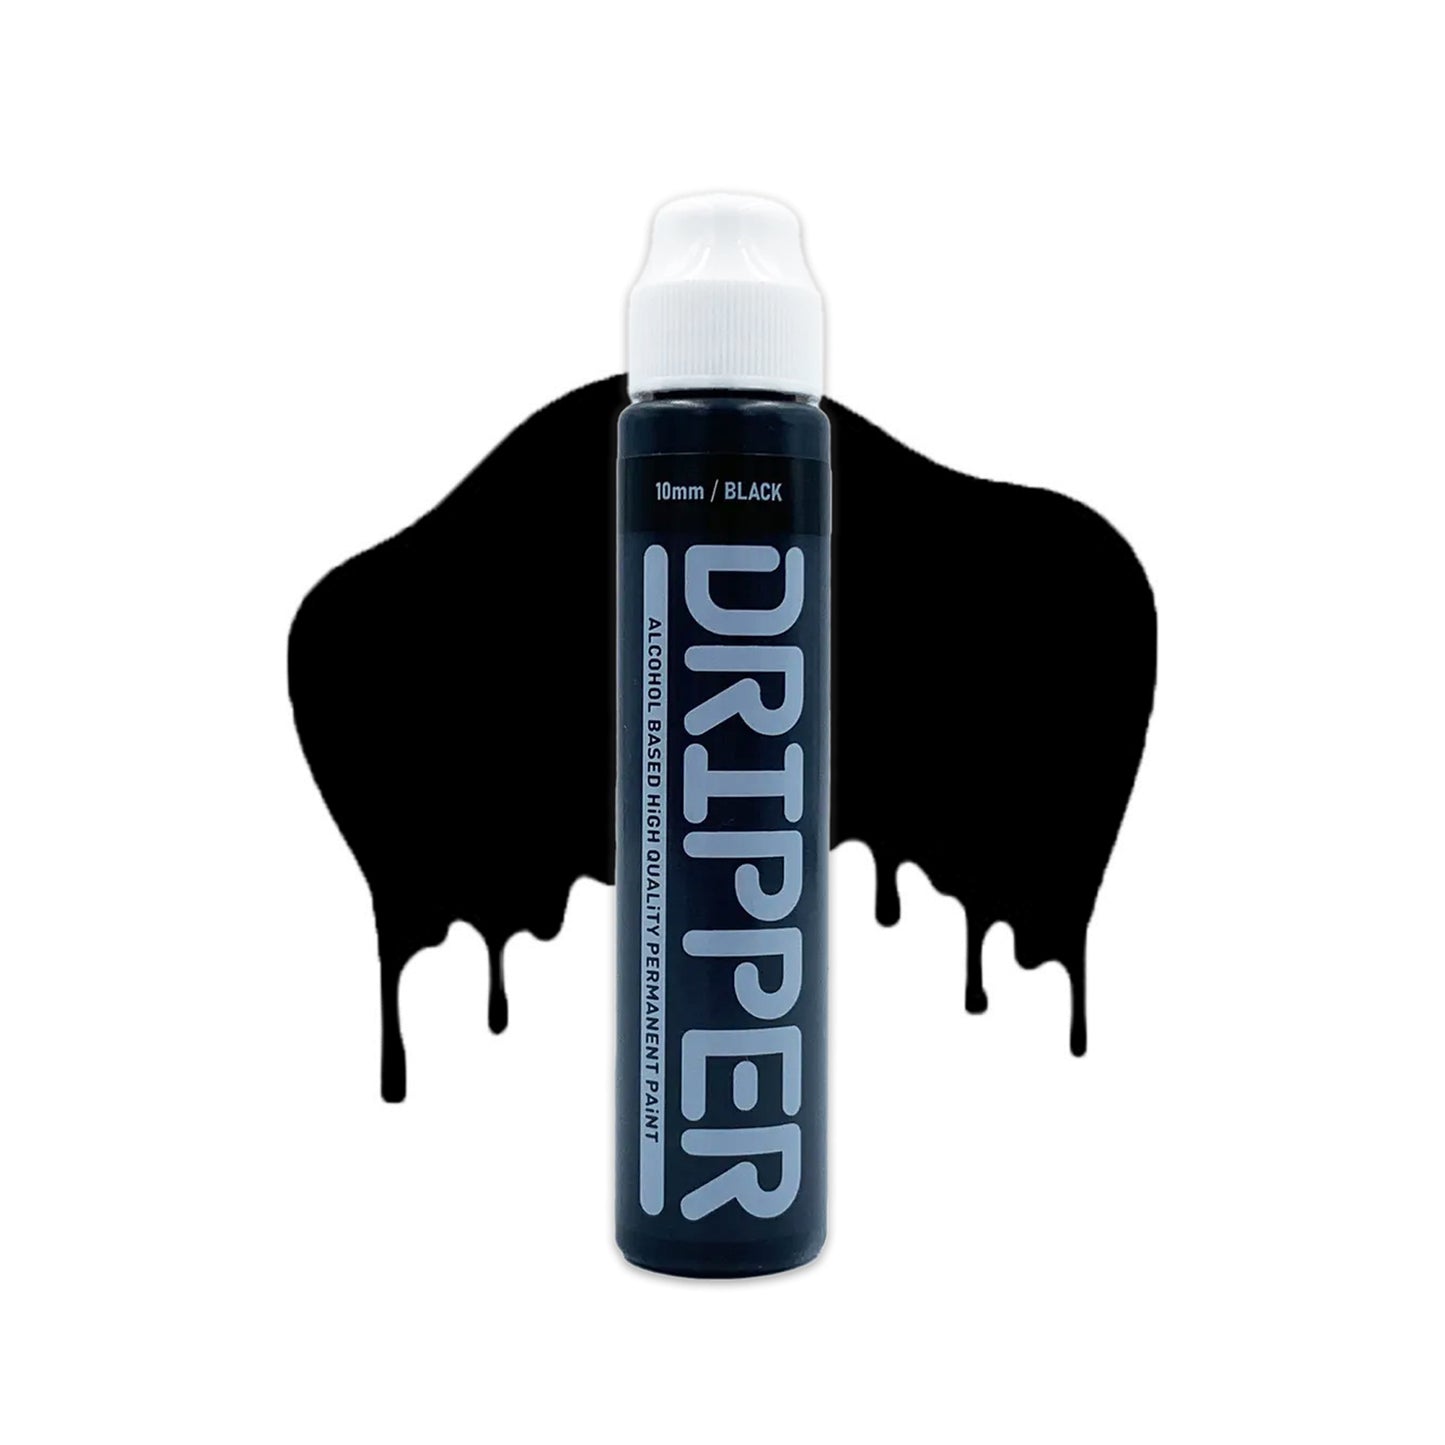 Black mop container with white cap and the word "Dripper" written on the face in a white font. The mop is positioned in front of a white background with drips that match the black color of the mop.